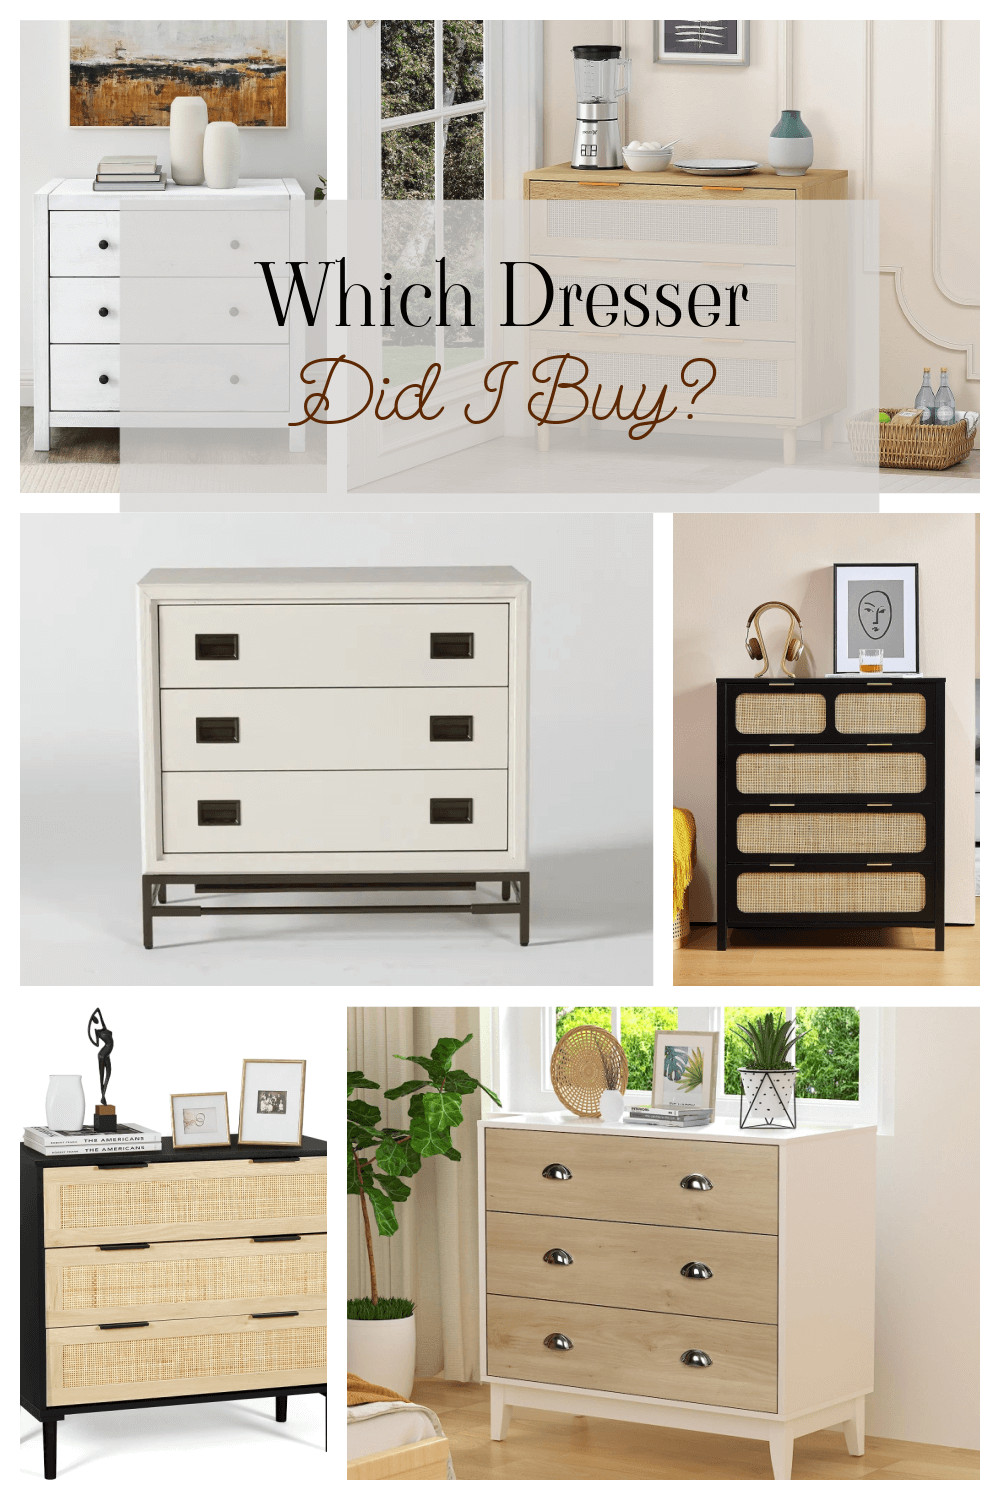 The Quest For A Dresser